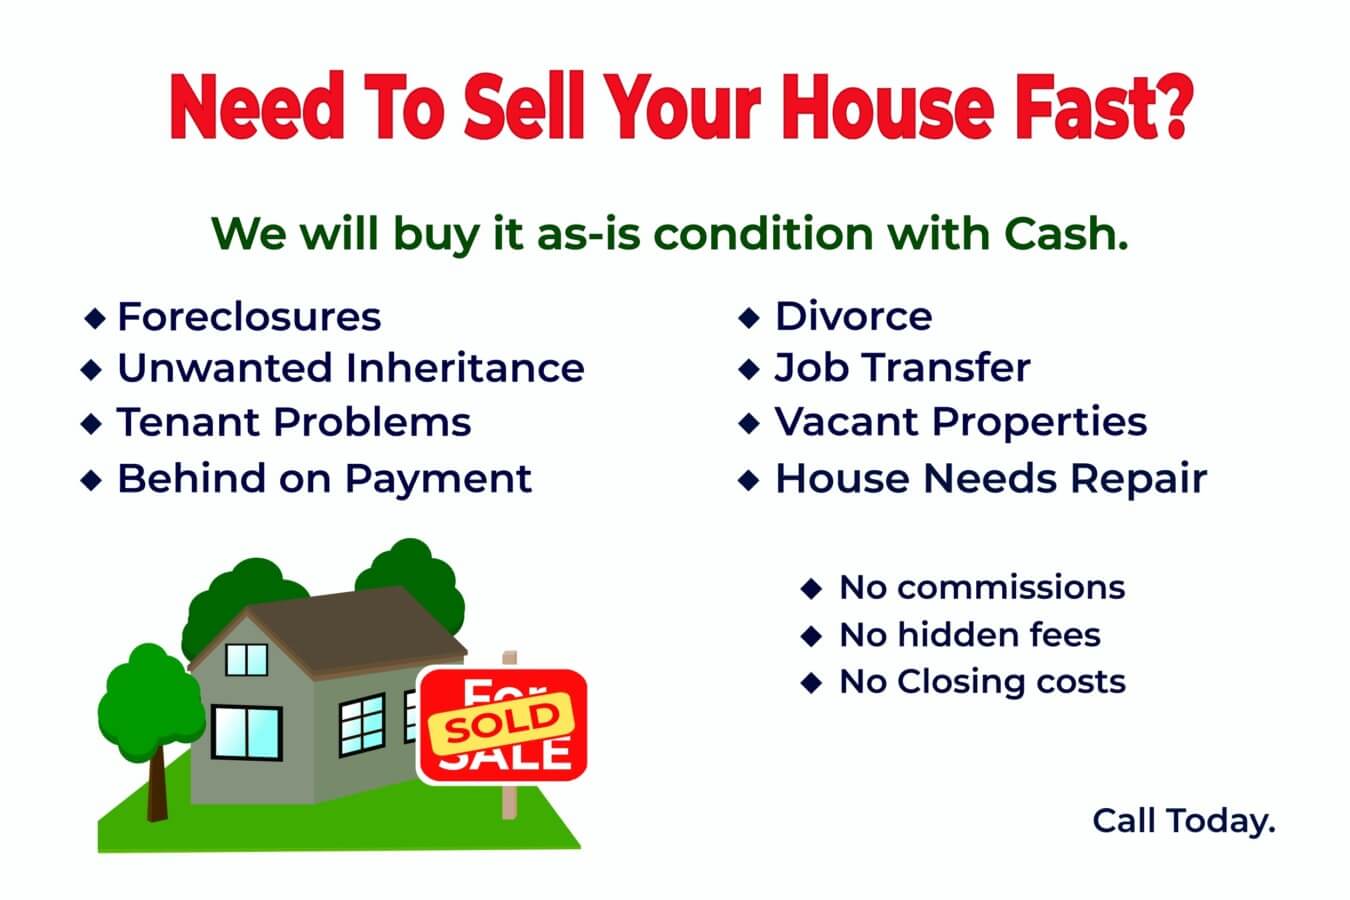 sell-your-home-fast